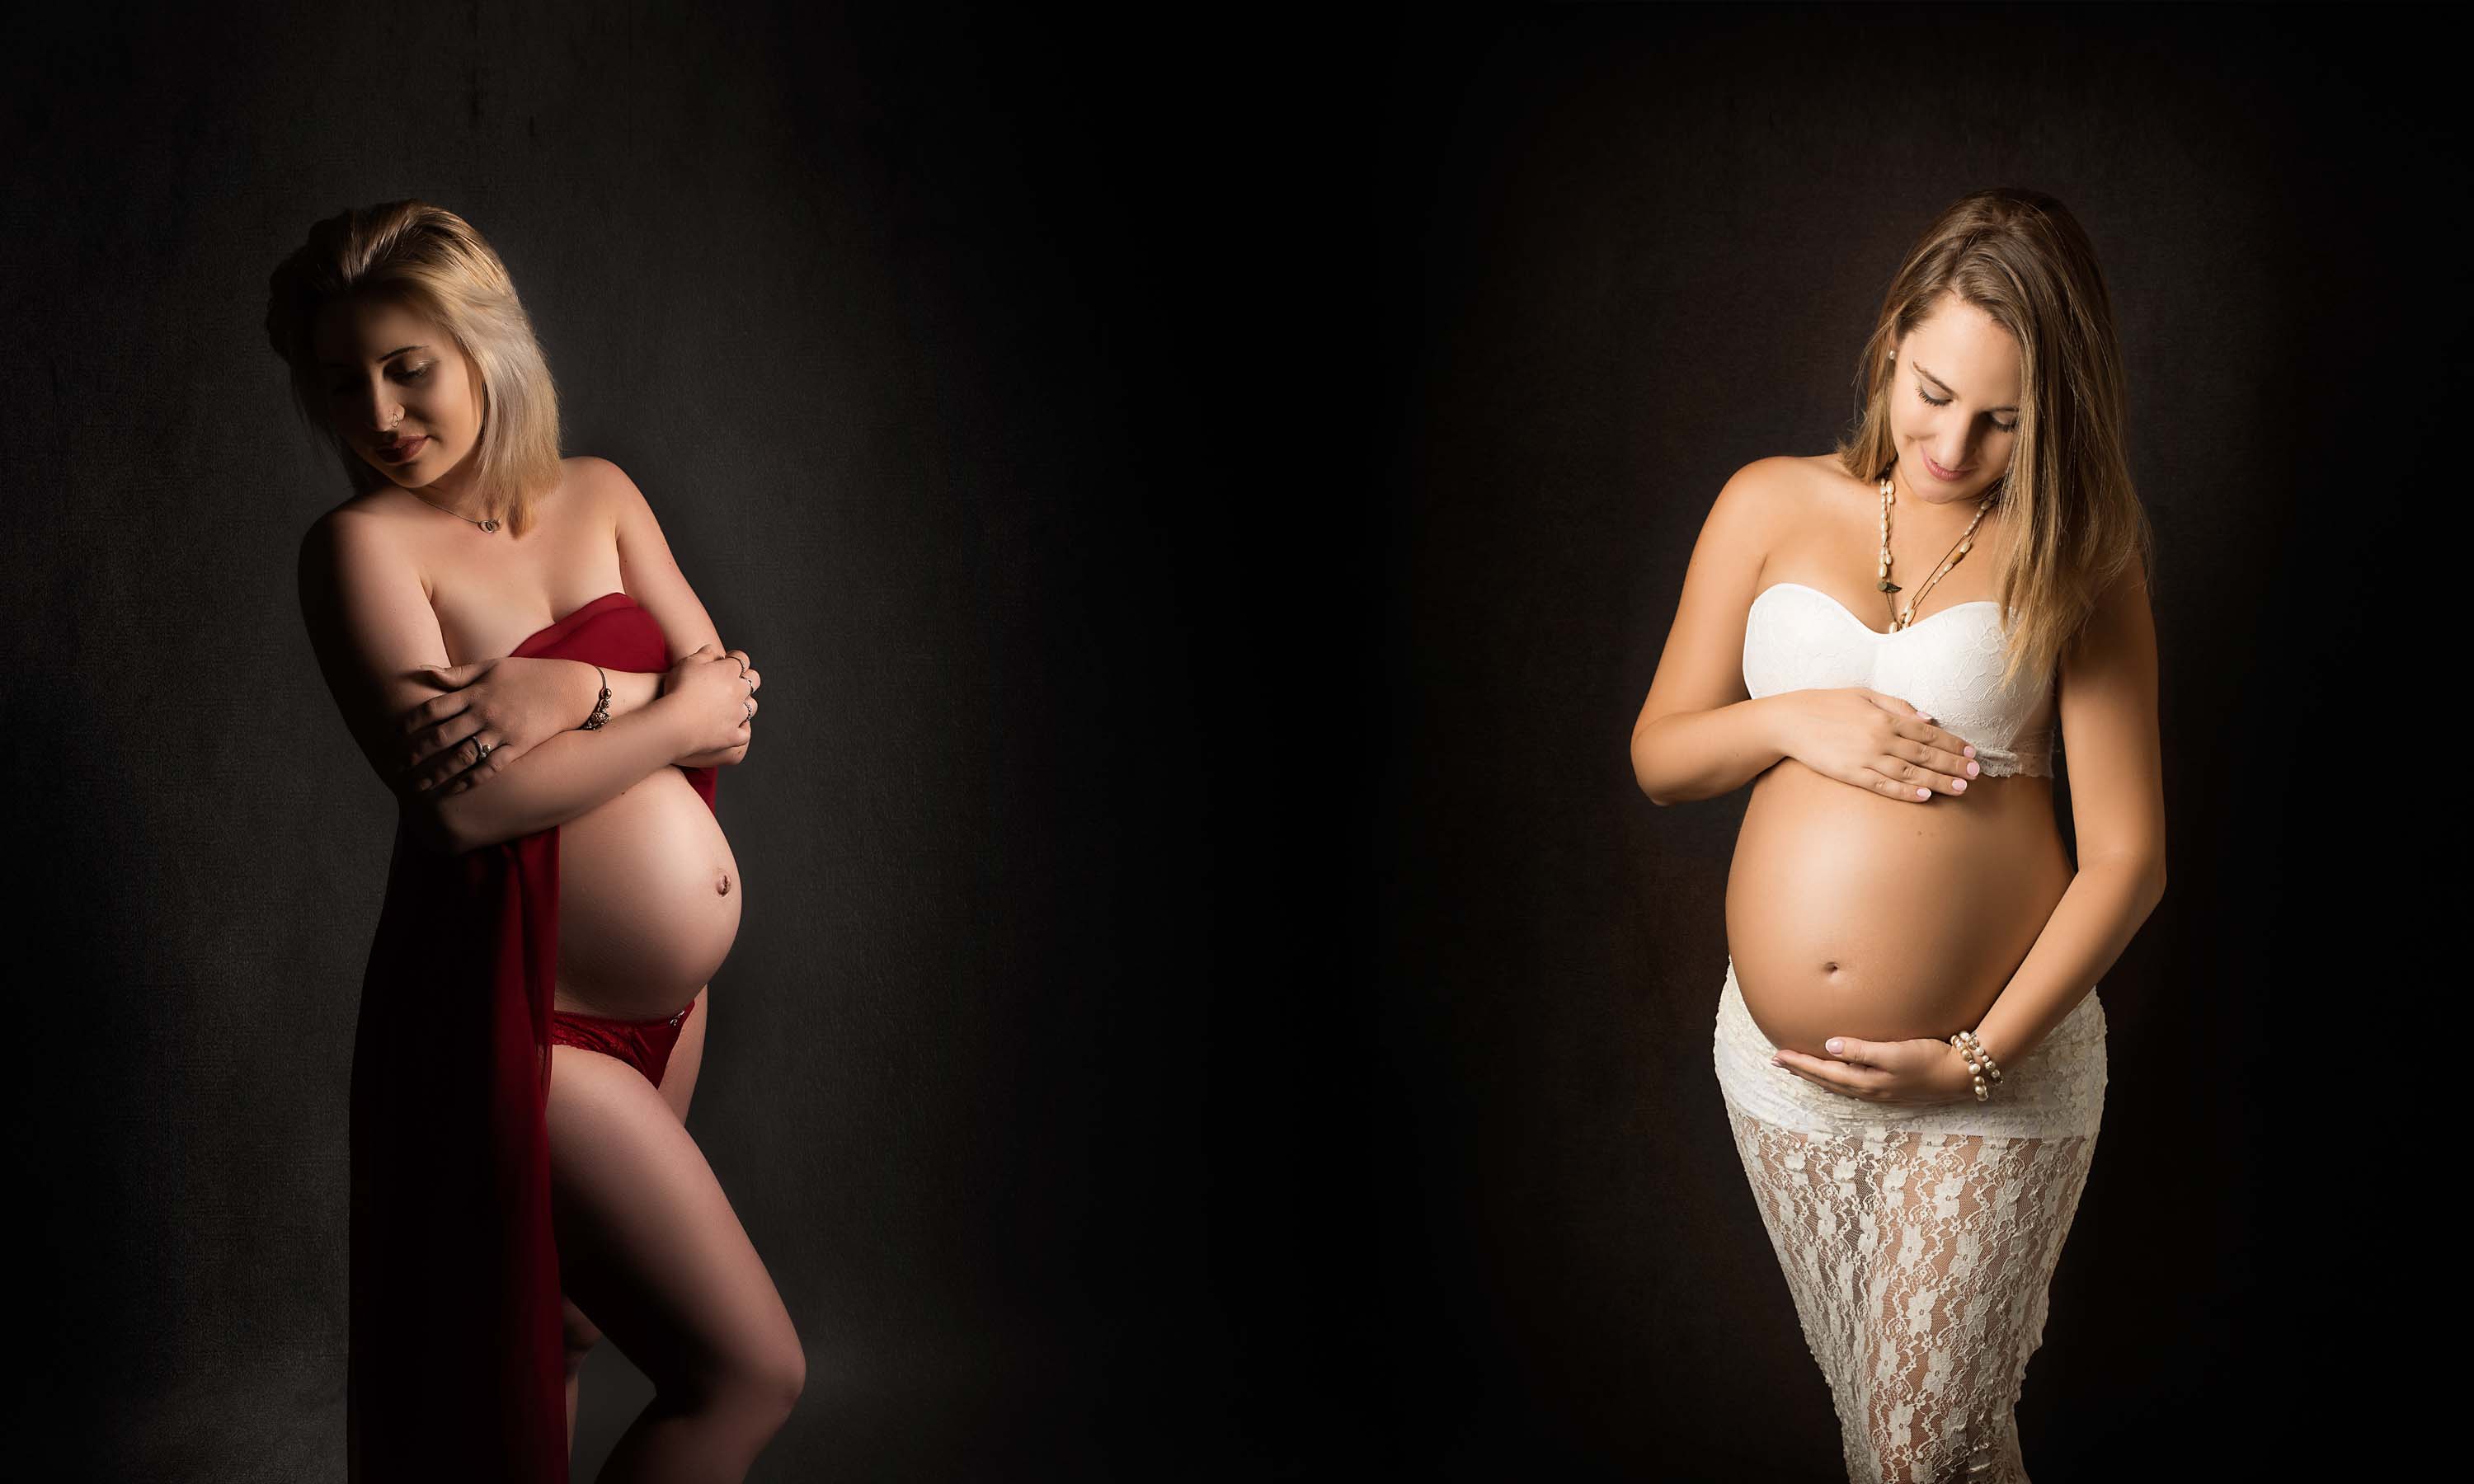 Pregnant photoshoot of one lady wearing red material and one lady wearing ivory lace